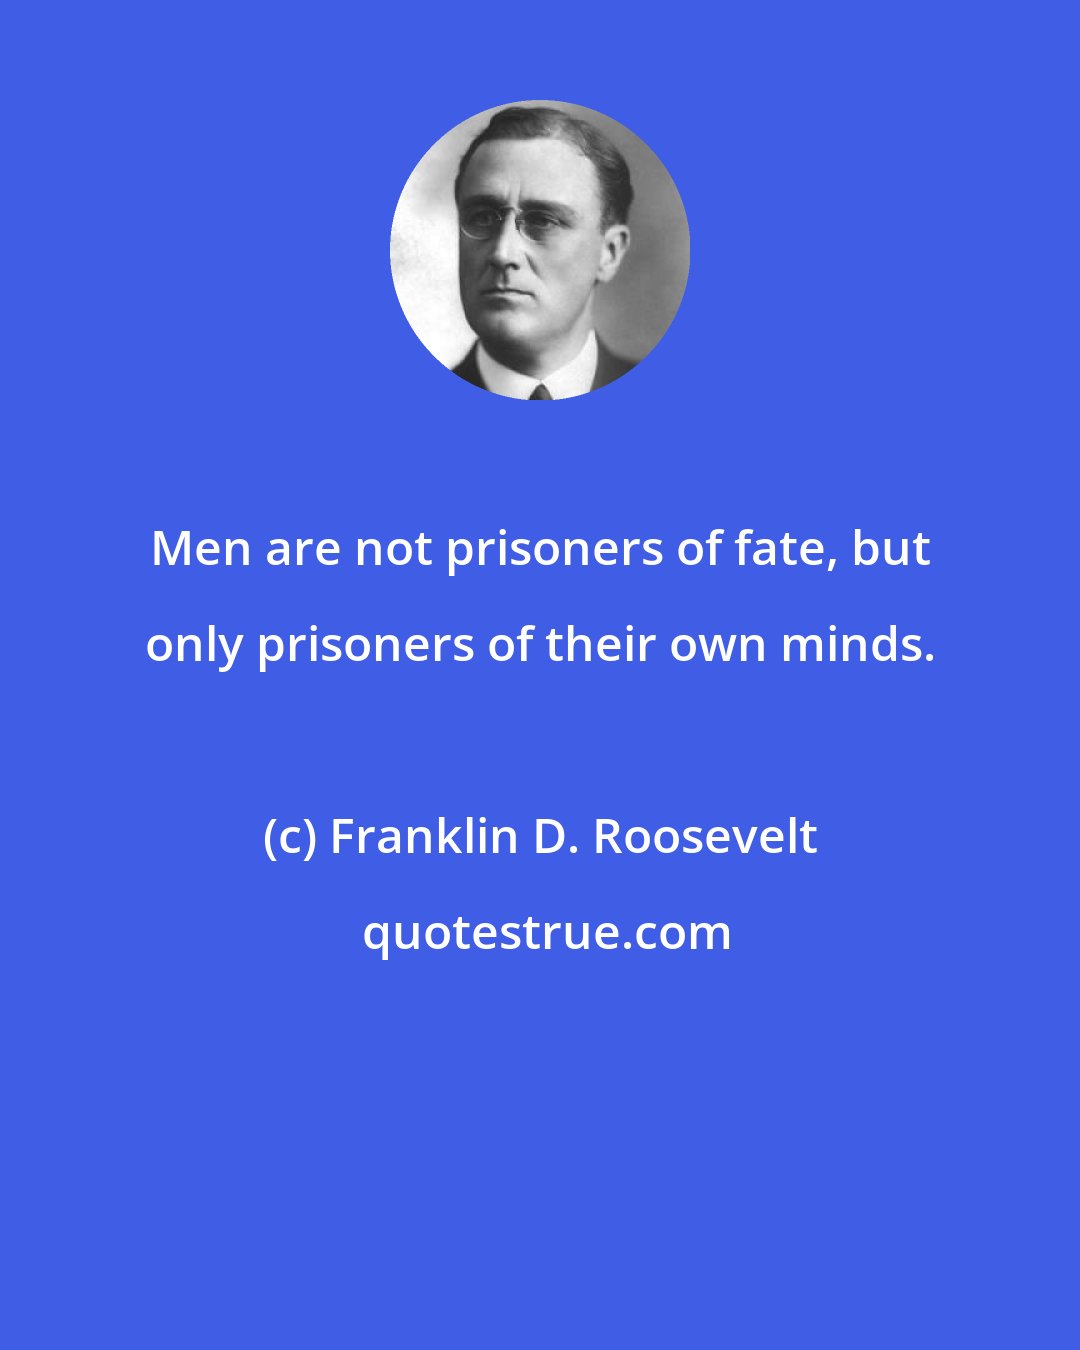 Franklin D. Roosevelt: Men are not prisoners of fate, but only prisoners of their own minds.